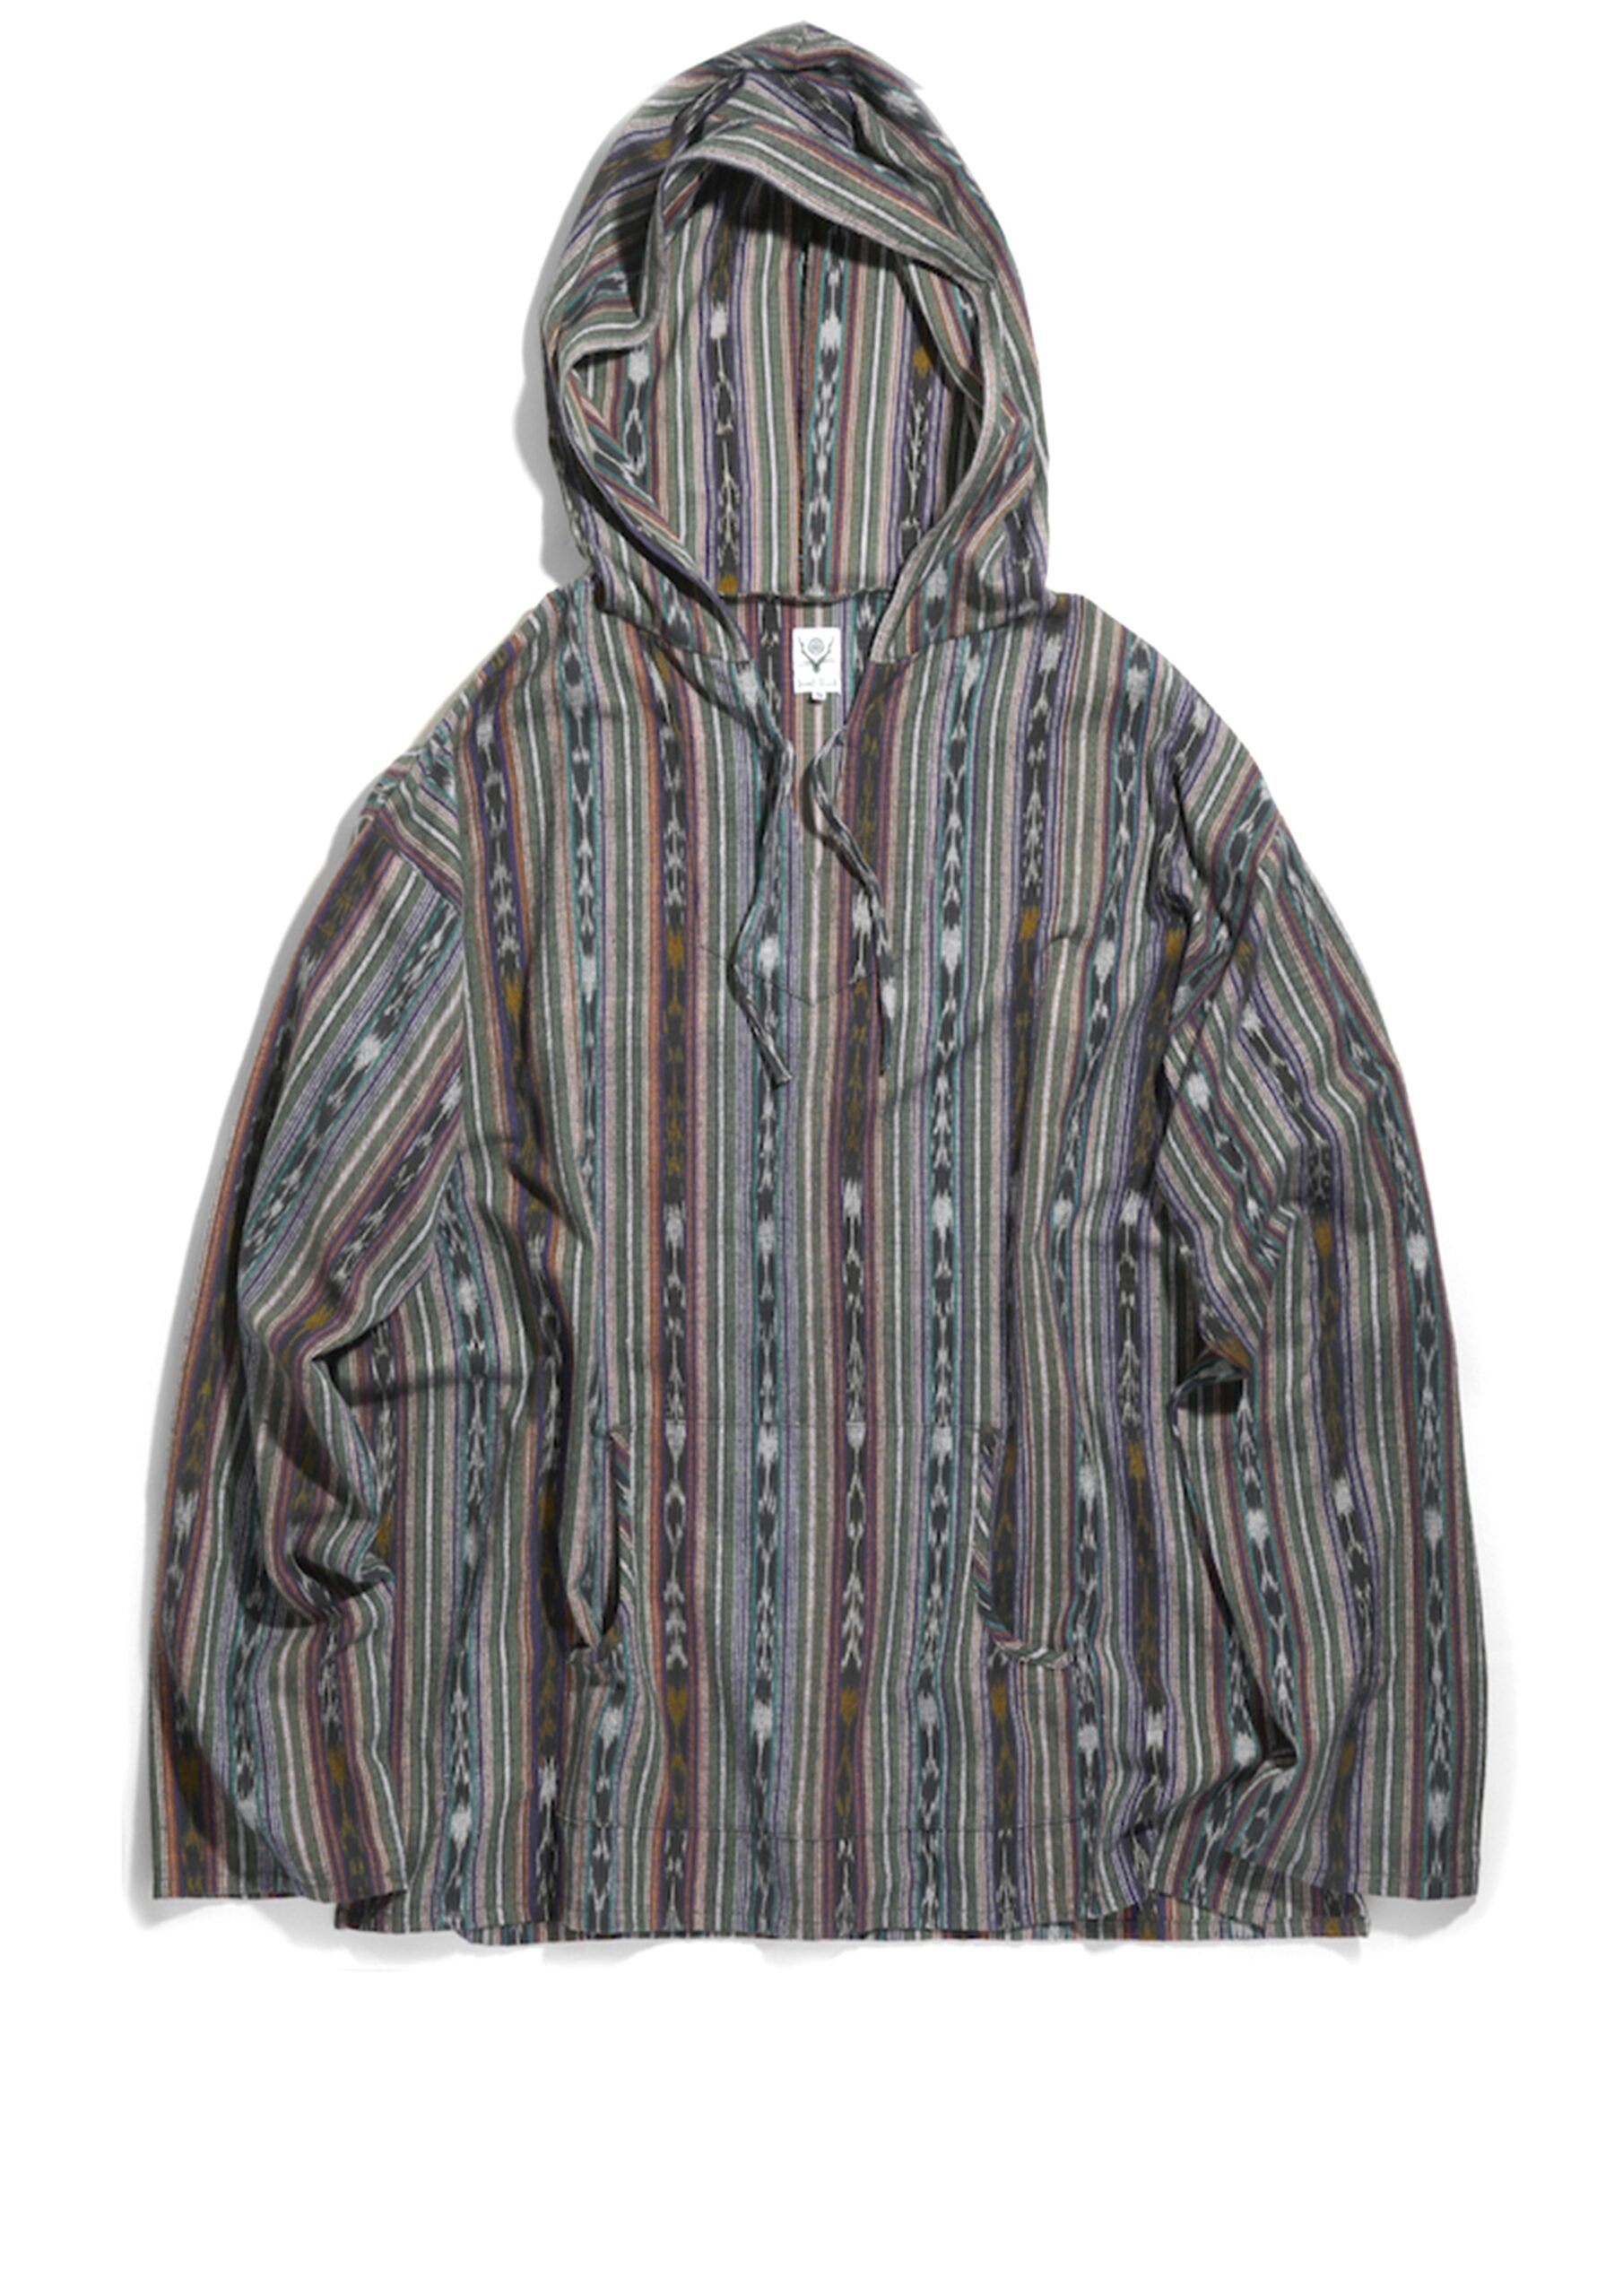 SOUTH2 WEST8 MEXICAN PARKA